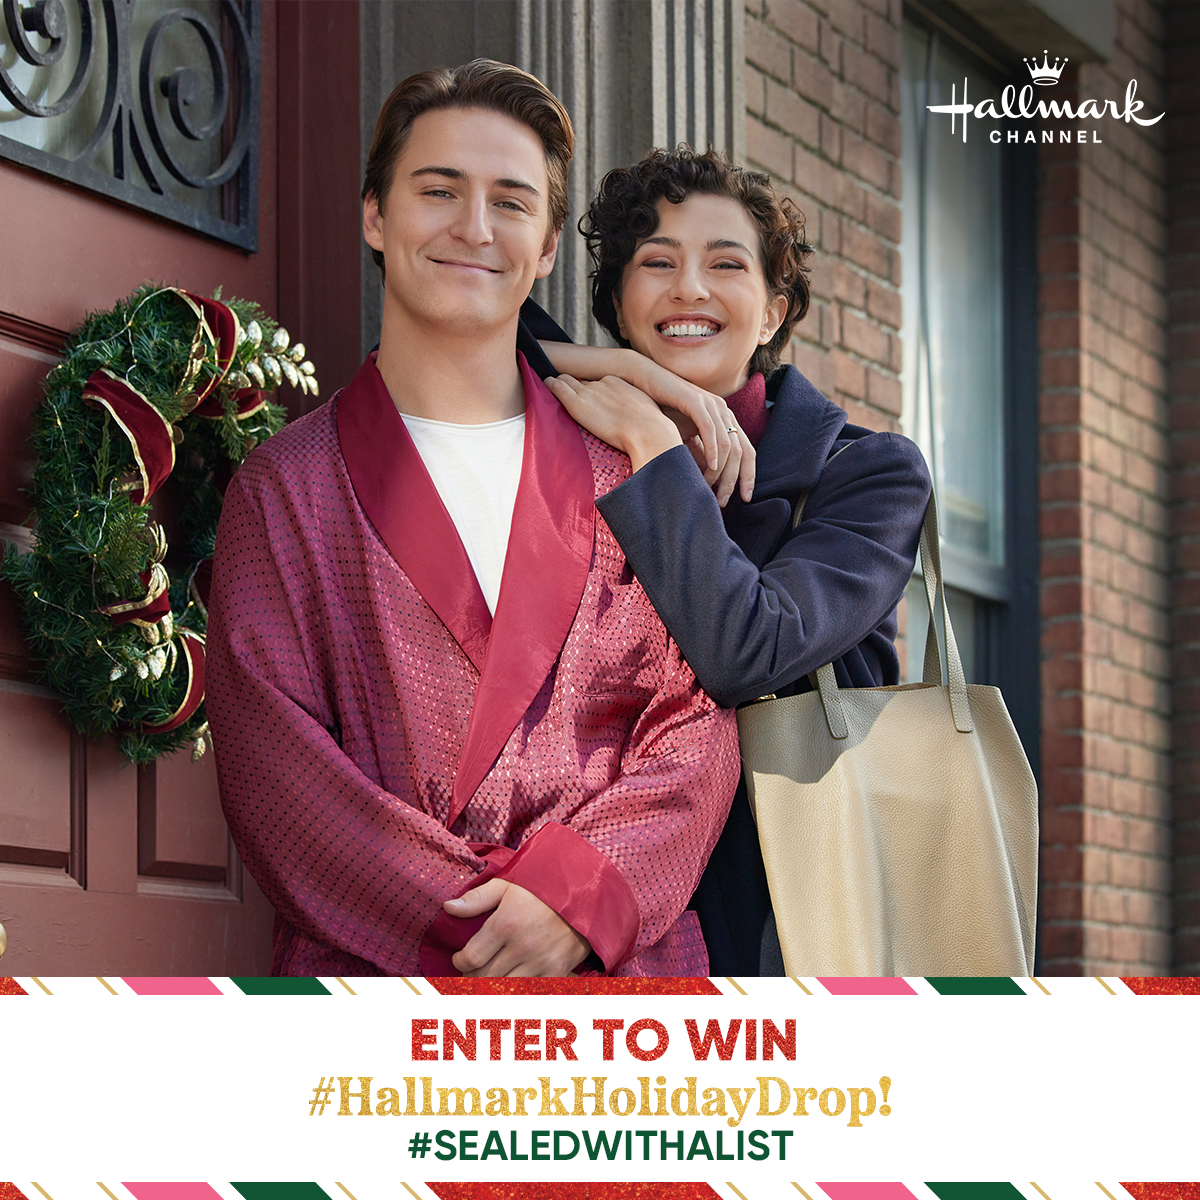 Last chance to be one of the #HallmarkWinners! Los Angeles & NYC, Re-Tweet TODAY using #HallmarkHolidayDrop and #SealedWithAList #contest for a chance to win a gift box dropped at your door for the #SealedWithAList premiere tonight at 8/7c! 🎁 Rules: fooji.info/ctc_rules